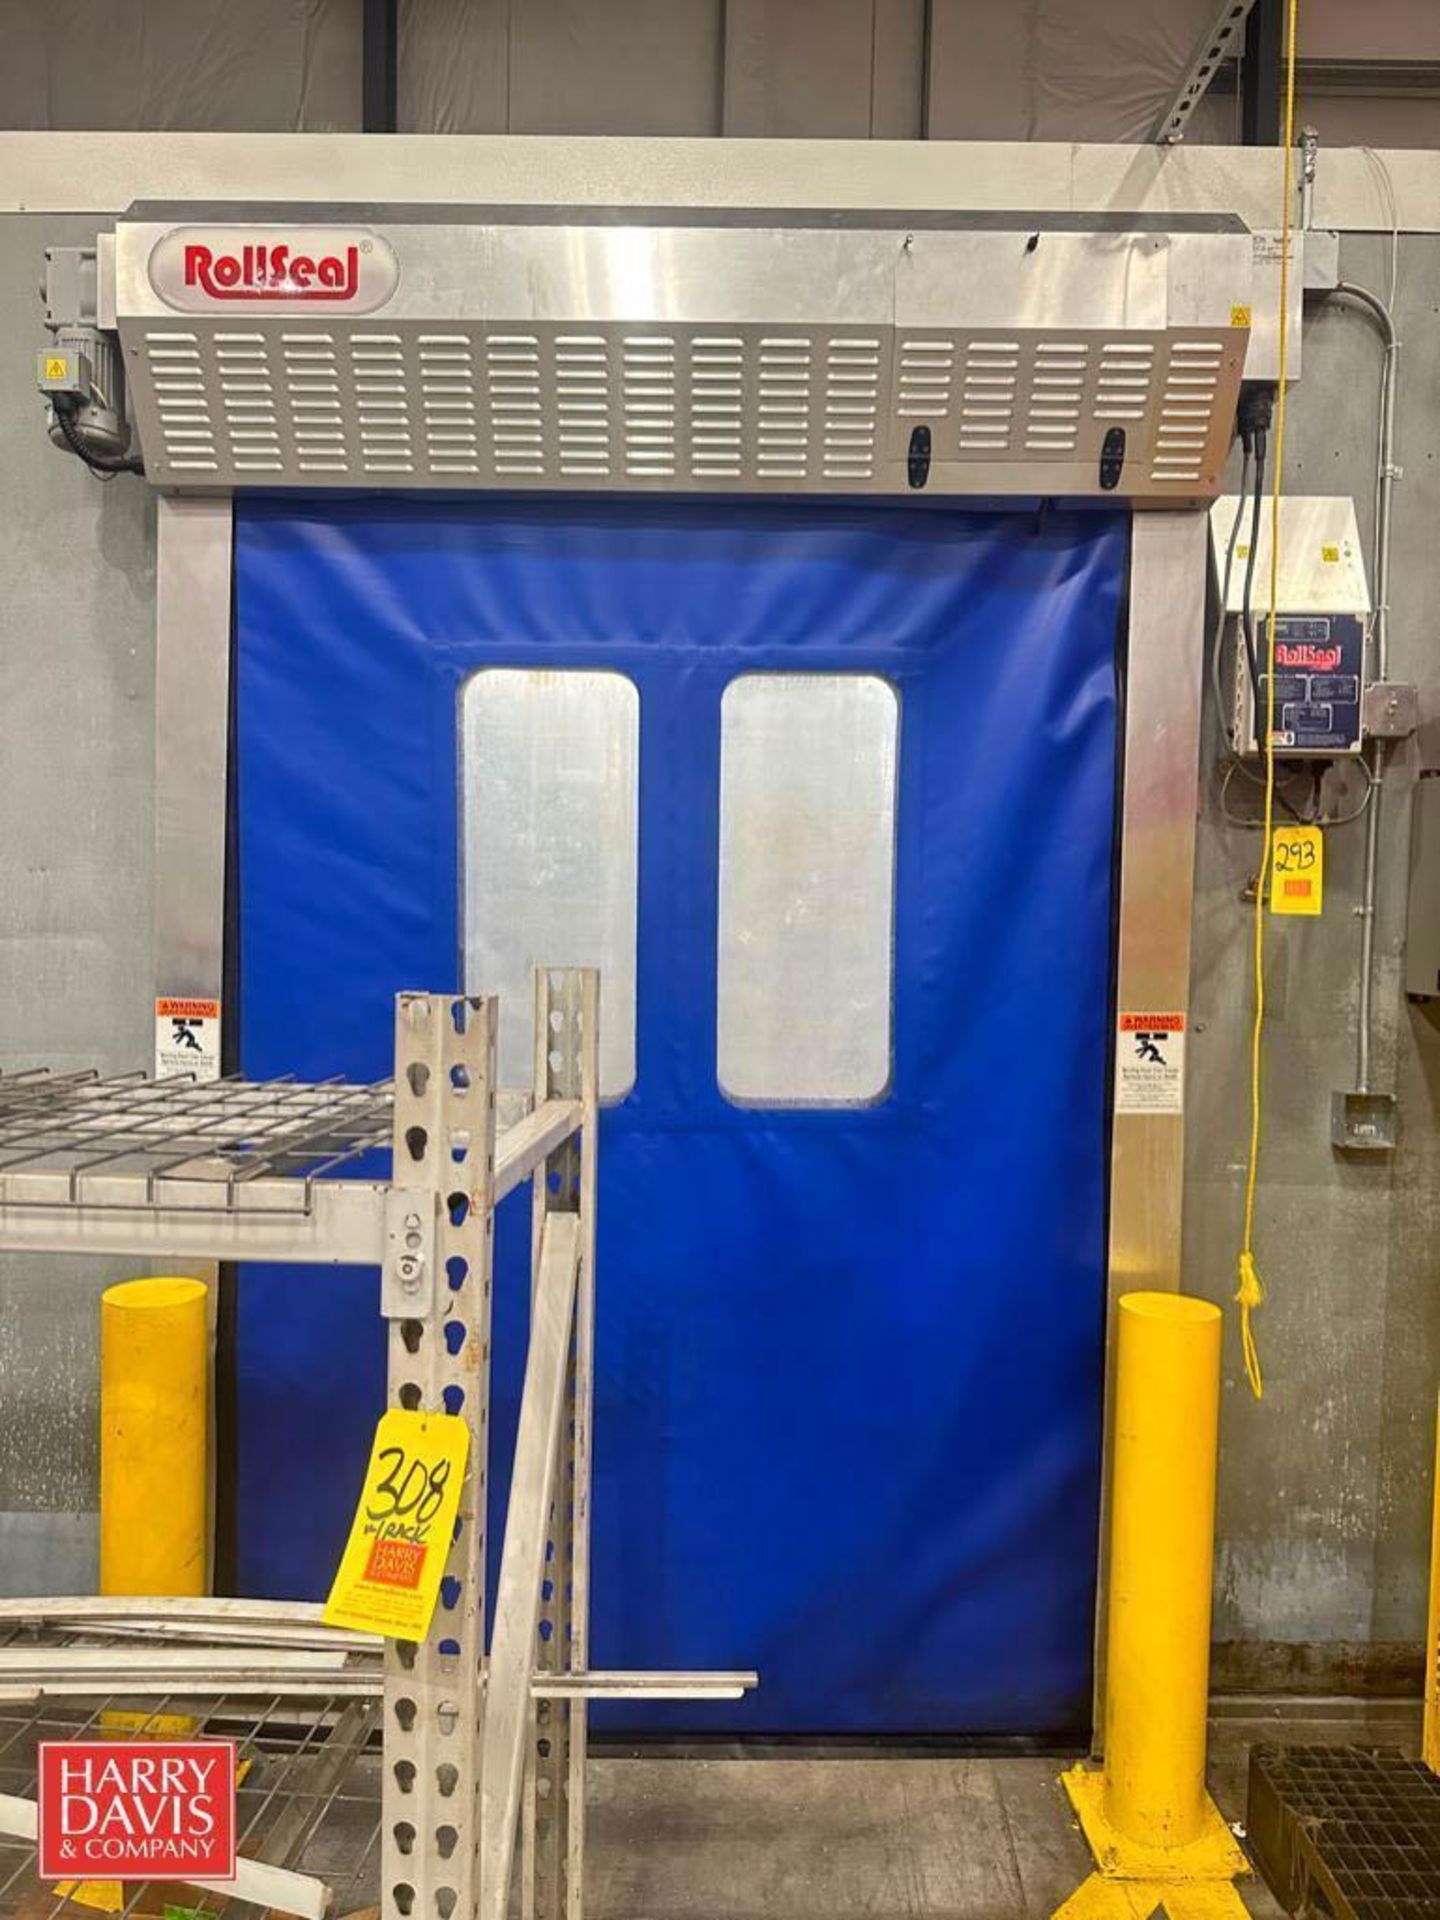 RollSeal High Speed Rollup Door: 9’ x 75" with Air Curtain - Rigging Fee: $1,000